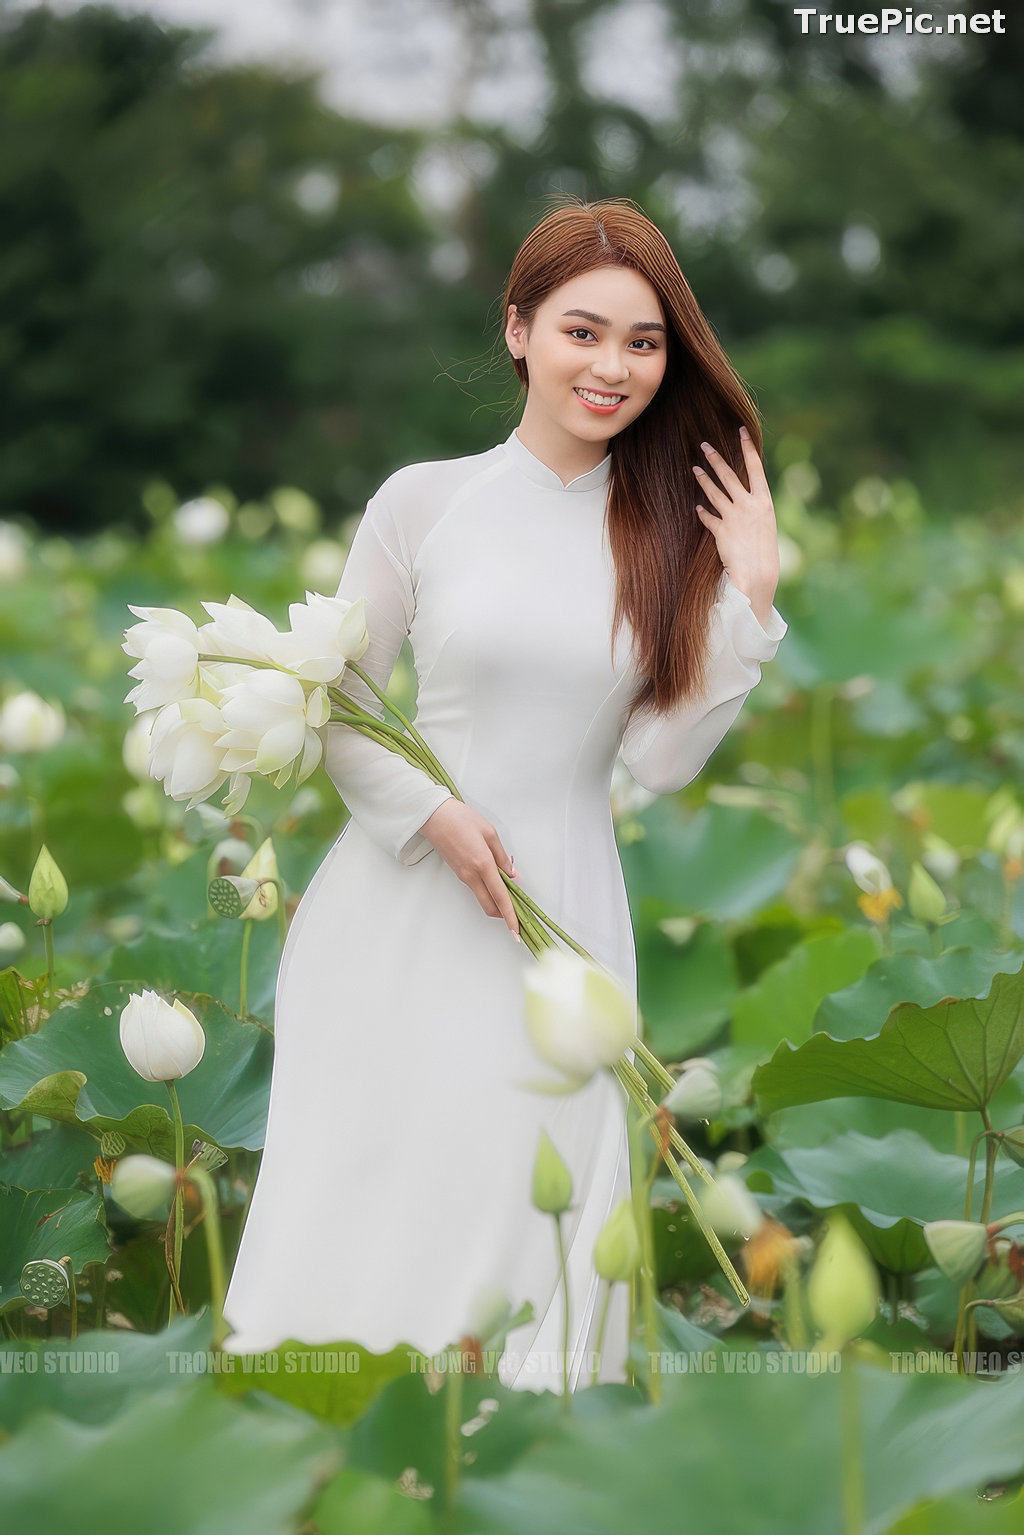 Image Vietnamese Model - Beautiful Girl and Lotus Flower - TruePic.net (56 pictures) - Picture-42